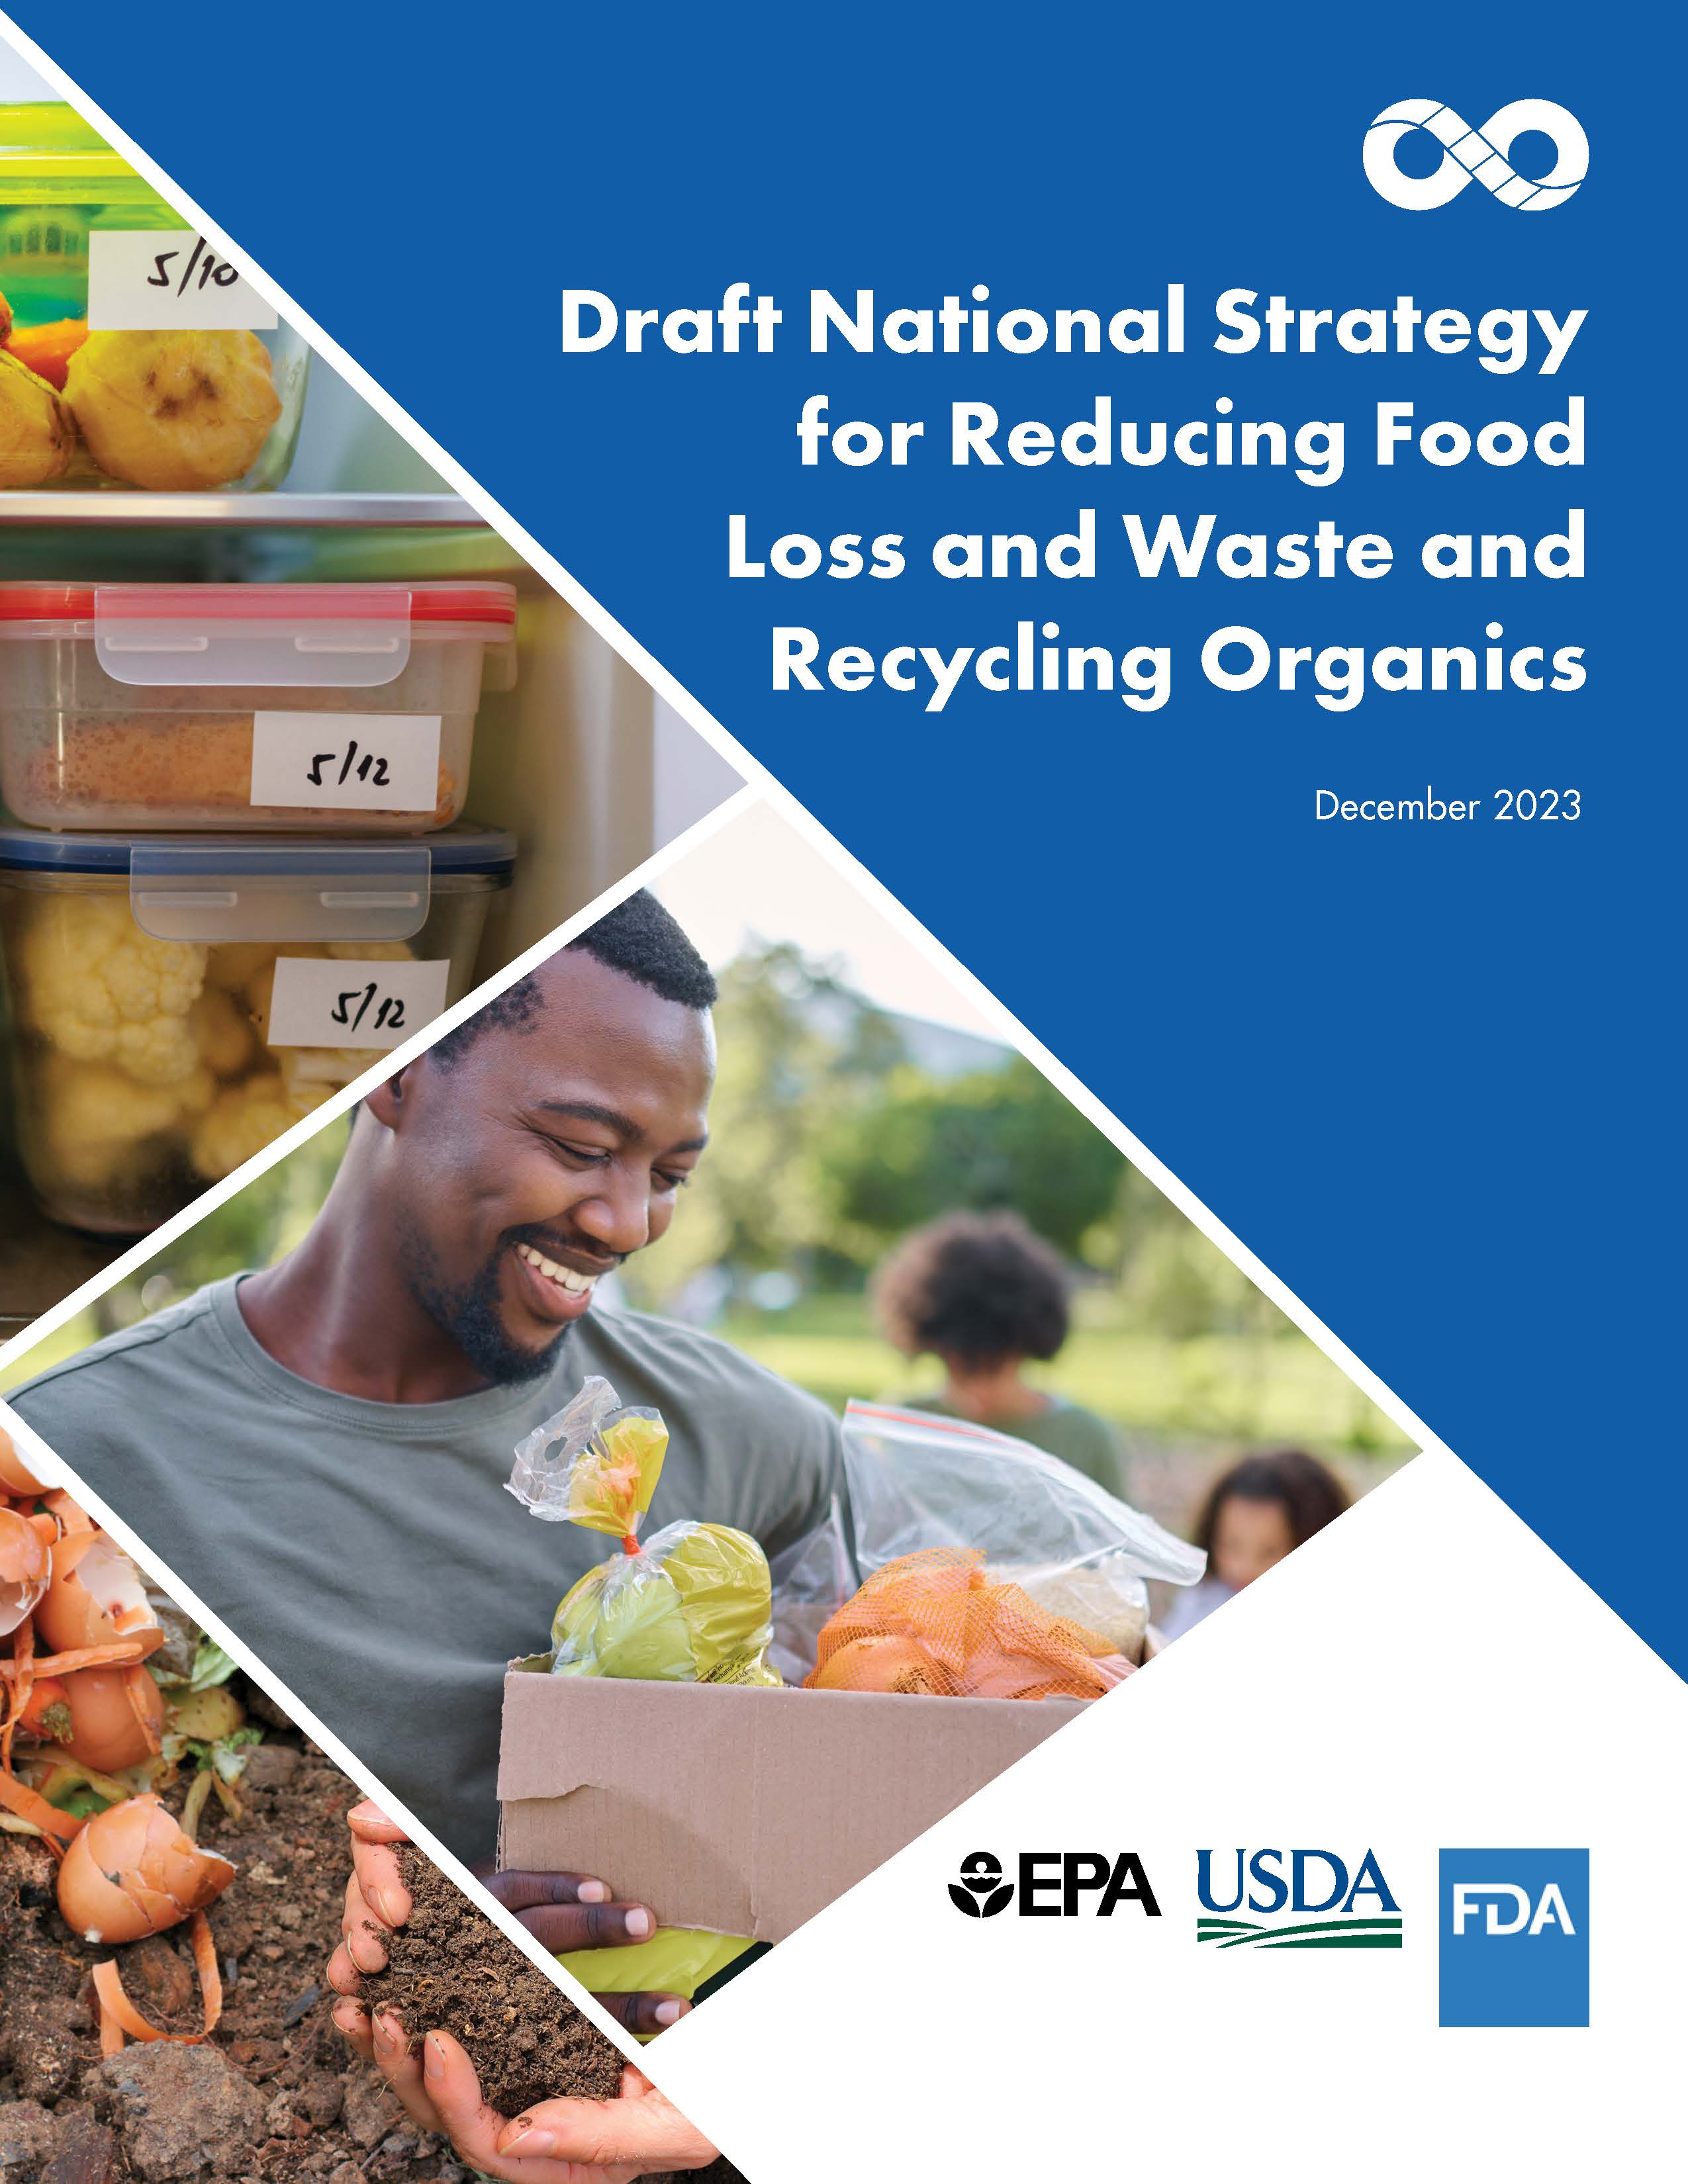 Cover of Draft National Strategy for Reducing Food Loss and Waste and Recycling Organics with images of food storage and composting.